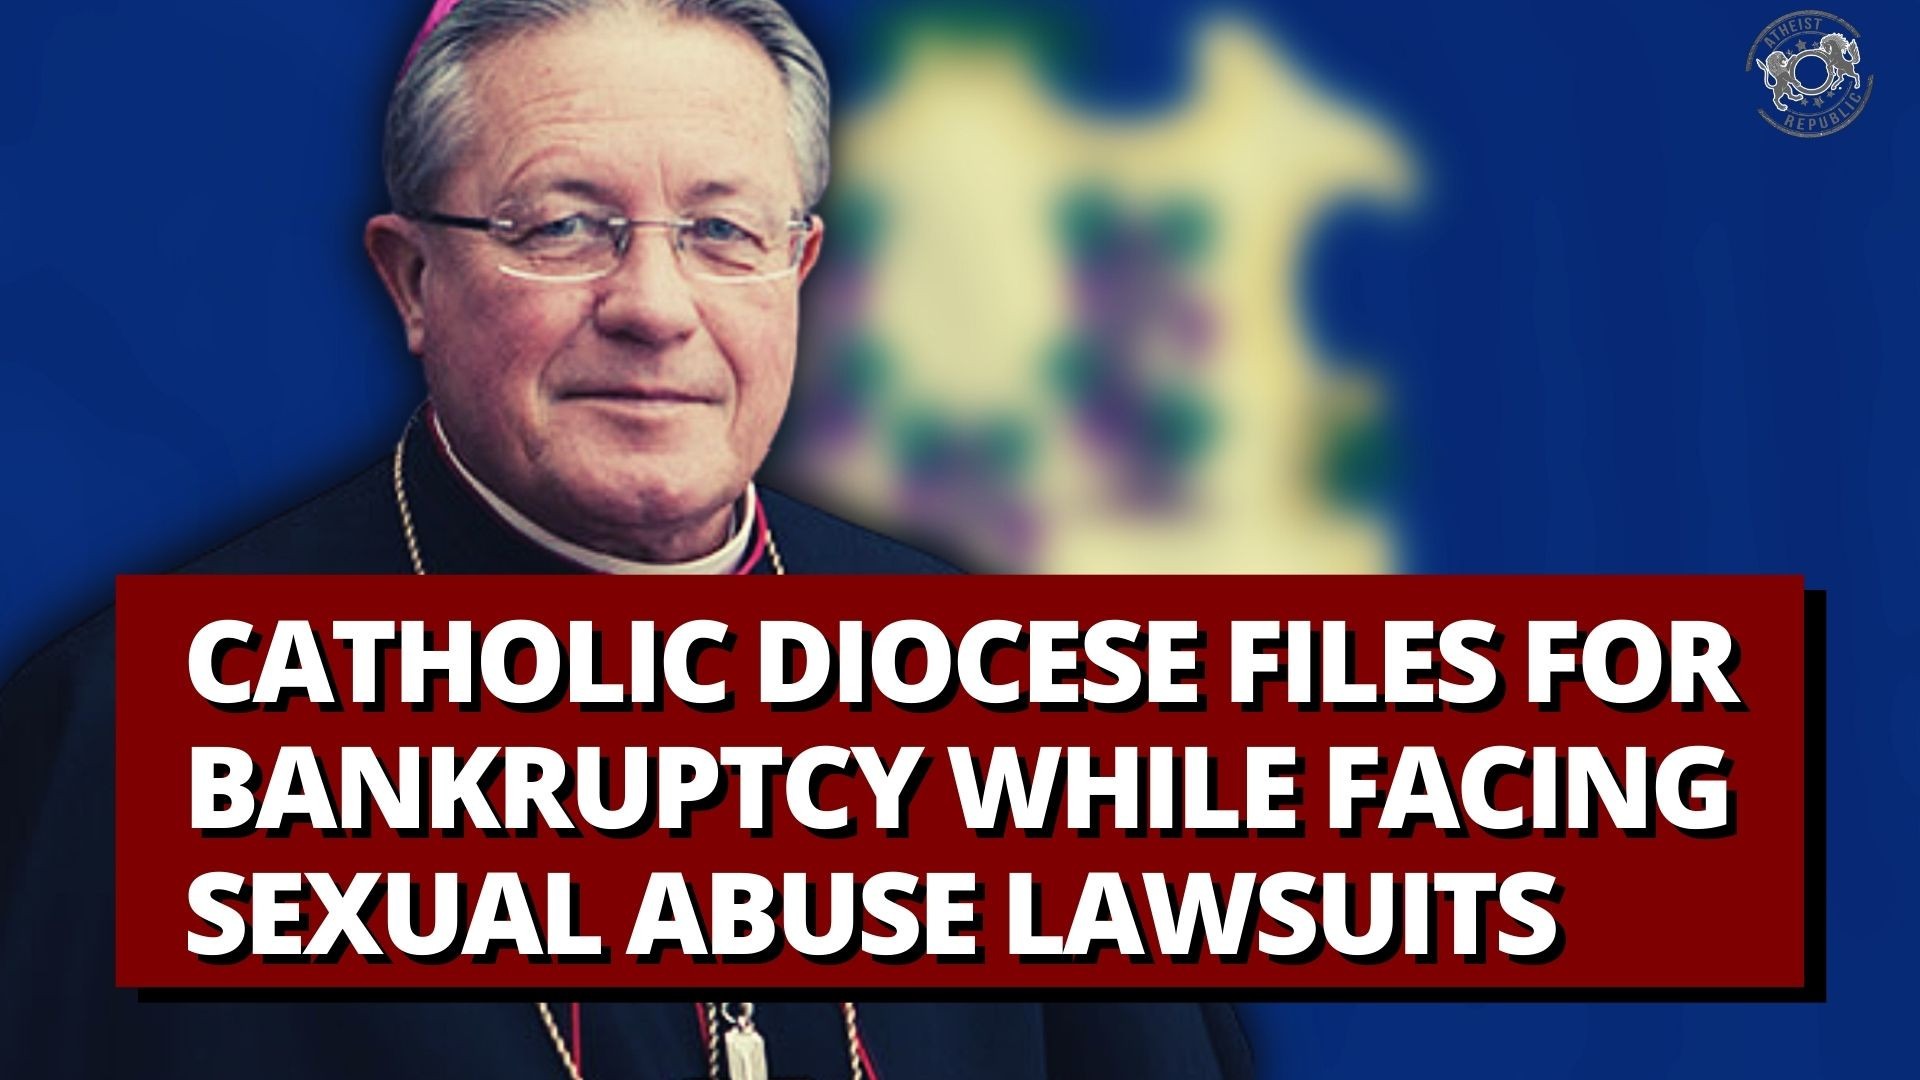 Catholic Diocese Files For Bankruptcy While Facing Sexual Abuse Lawsuits